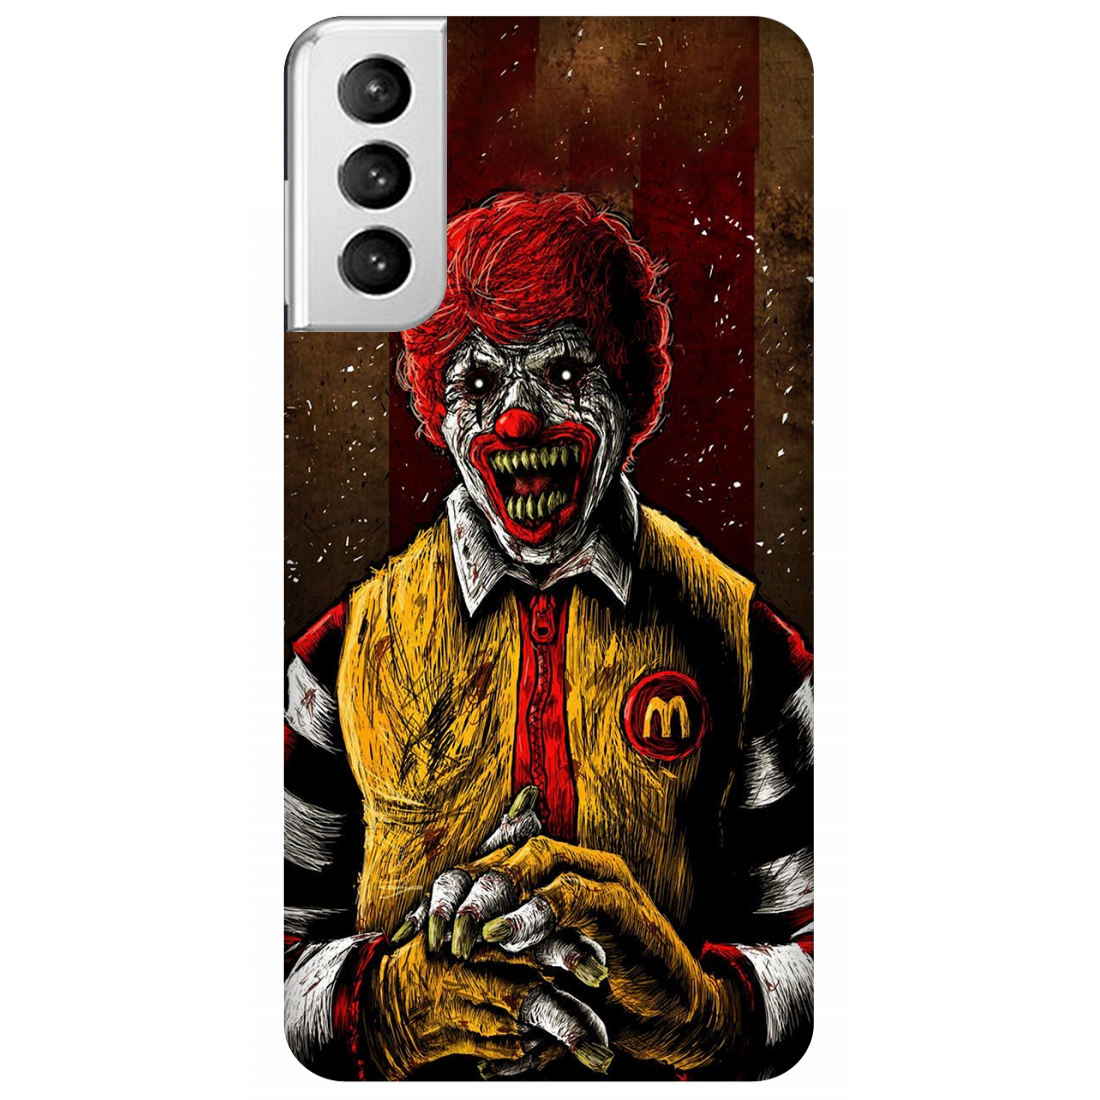 Sinister Shadows of Ronald Case Samsung Galaxy S21 Plus 5G